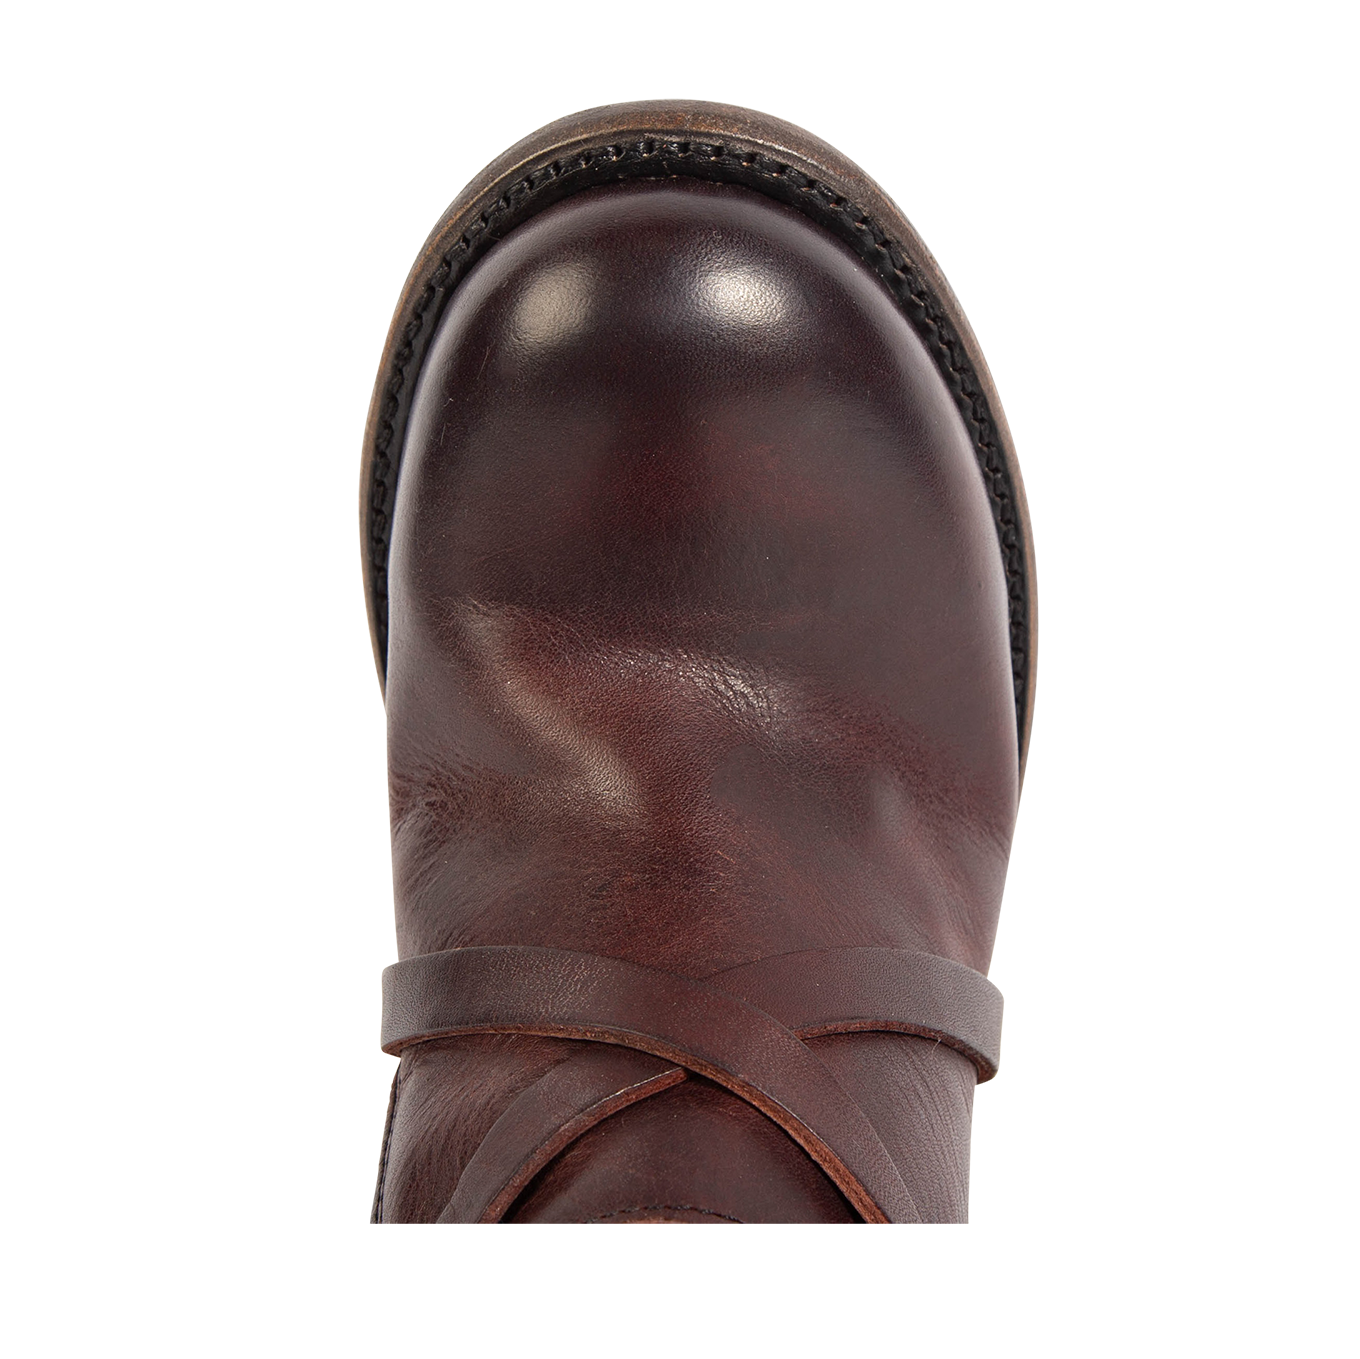 Top view showing round toe and leather ankle straps on FREEBIRD women's Baker wine multi boot